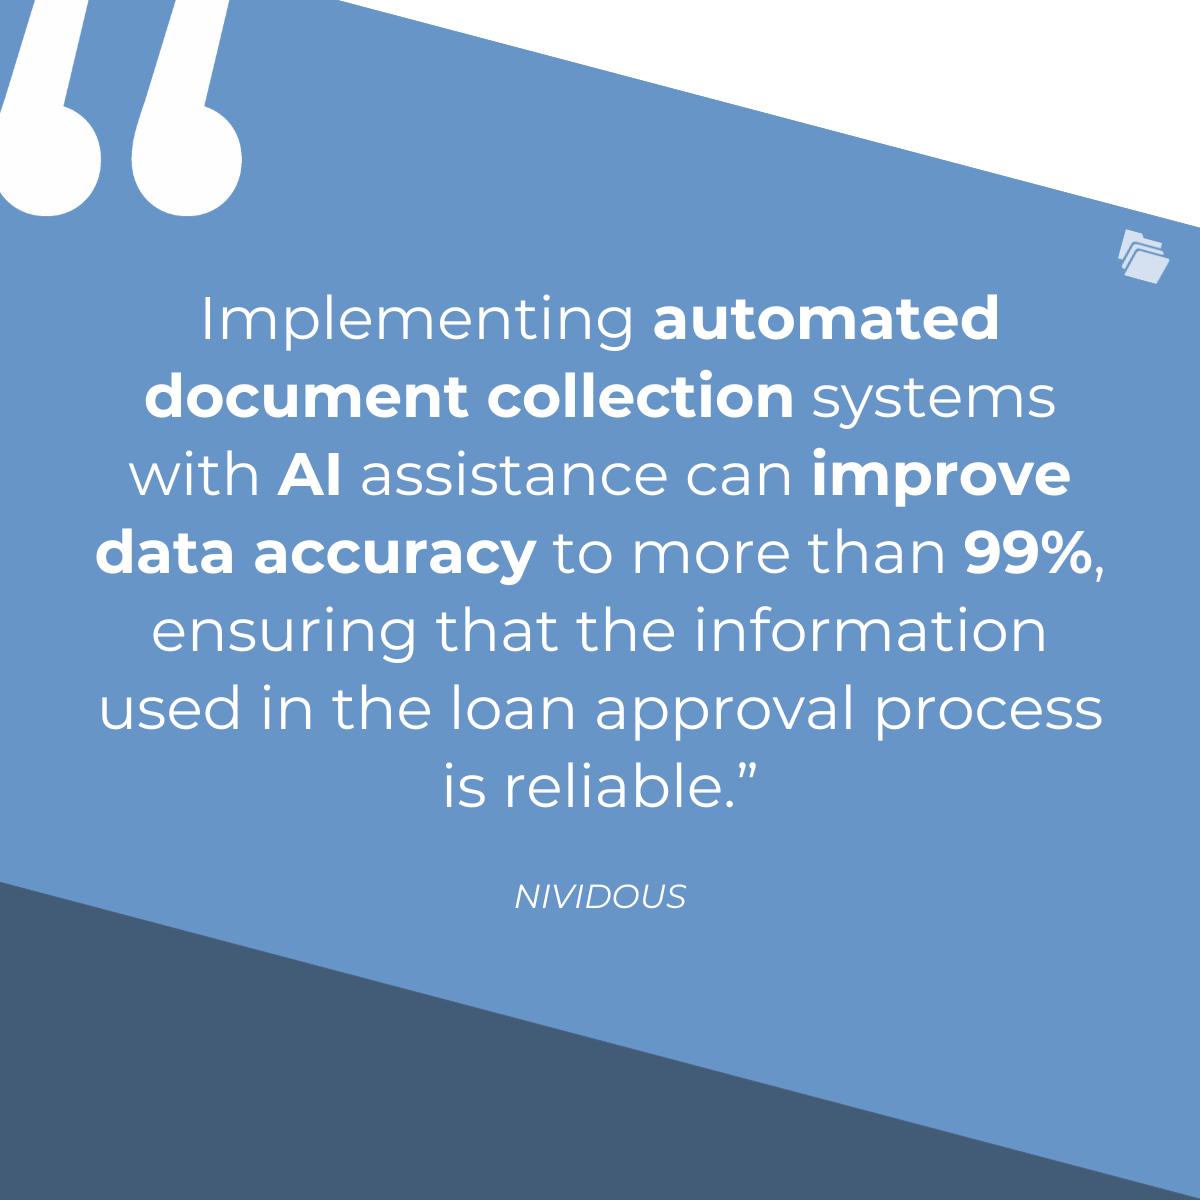 6 Tools that Improve Loan Officer Efficiency